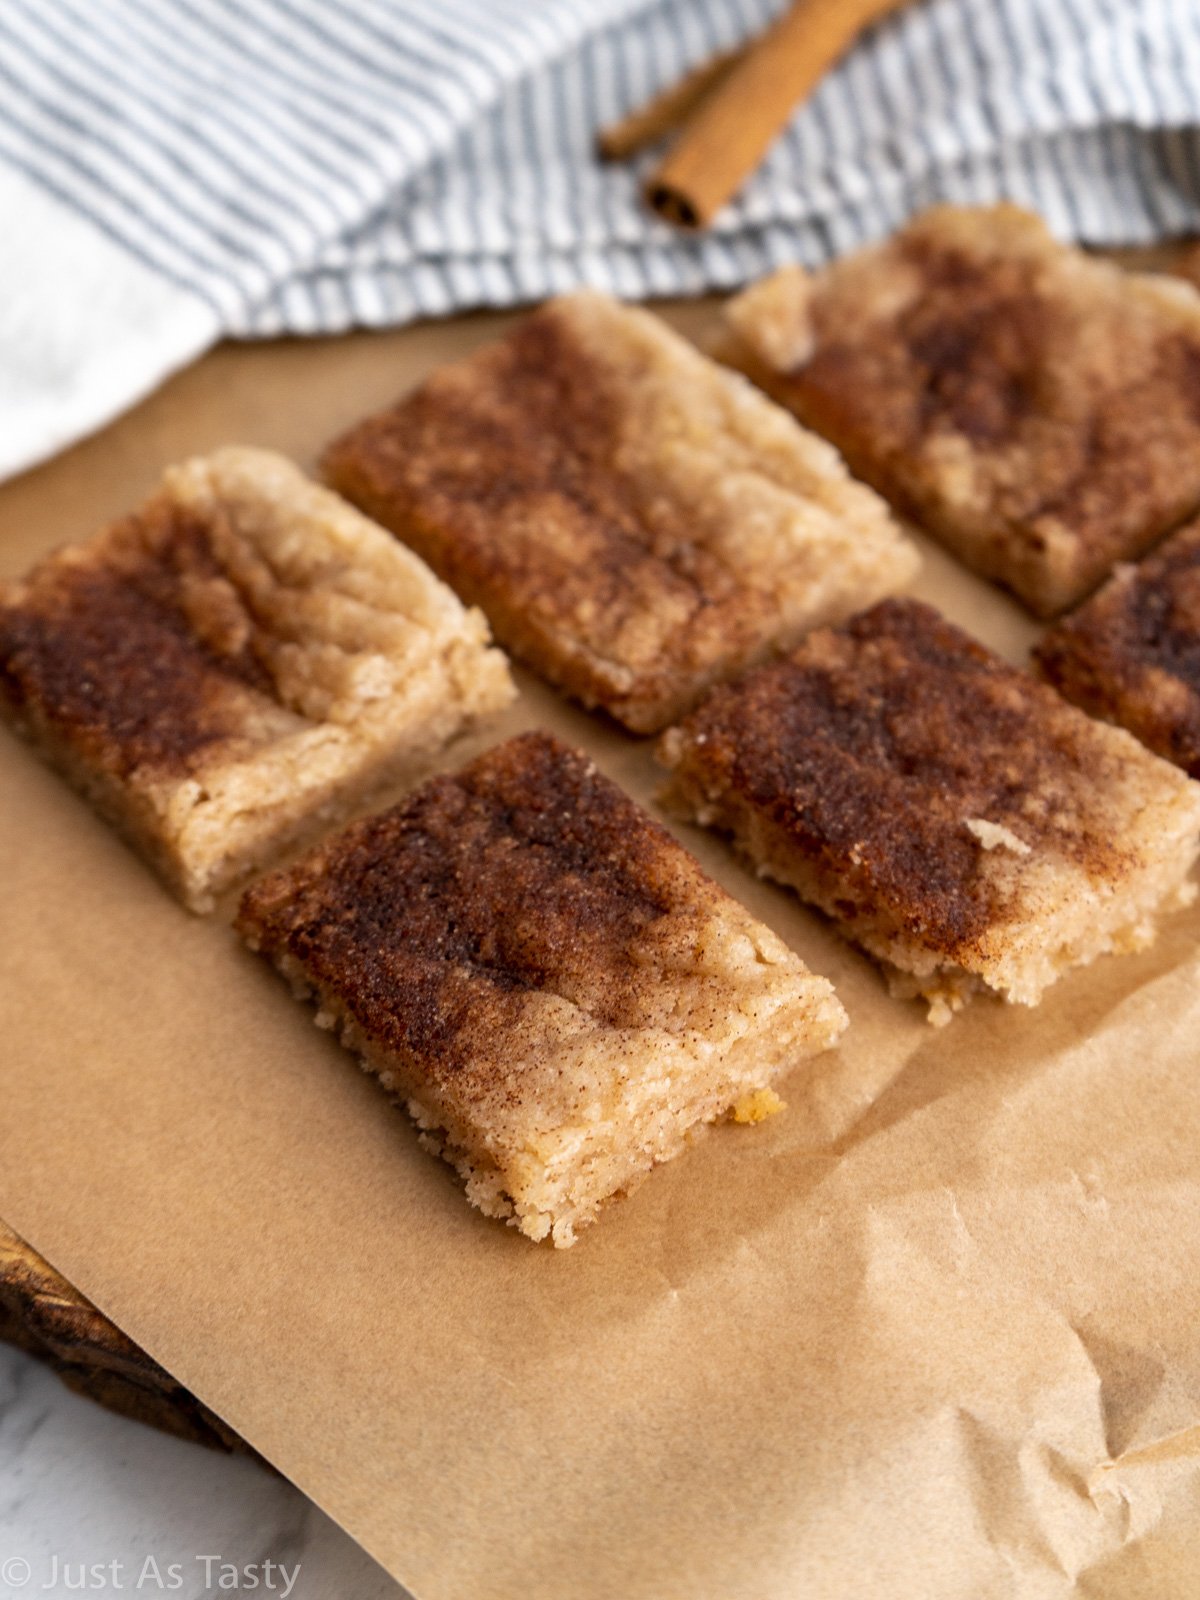 Square bars topped with cinnamon on brown parchment paper.